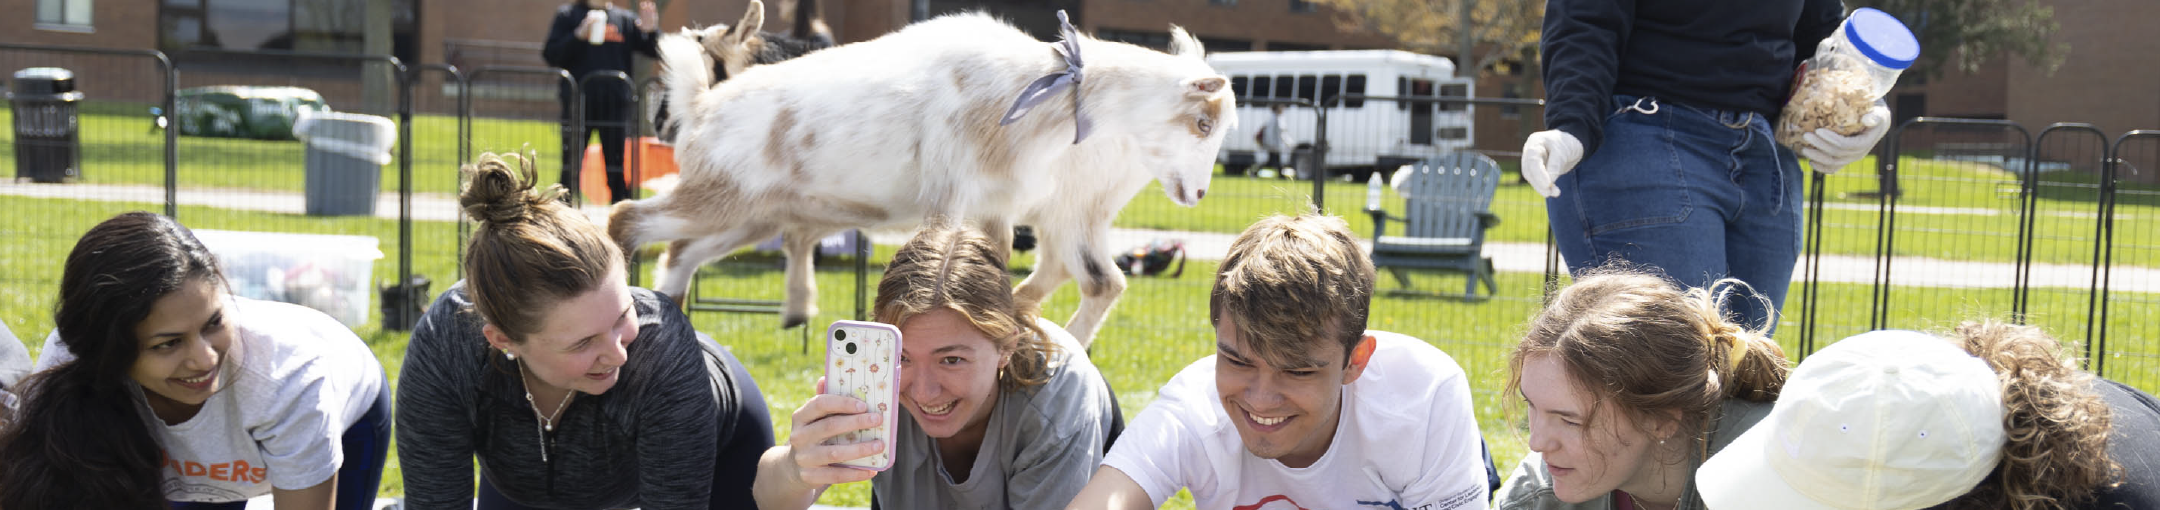 Students lined up on their hands and knees with a goat walking across their backs in a Goat Yoga program